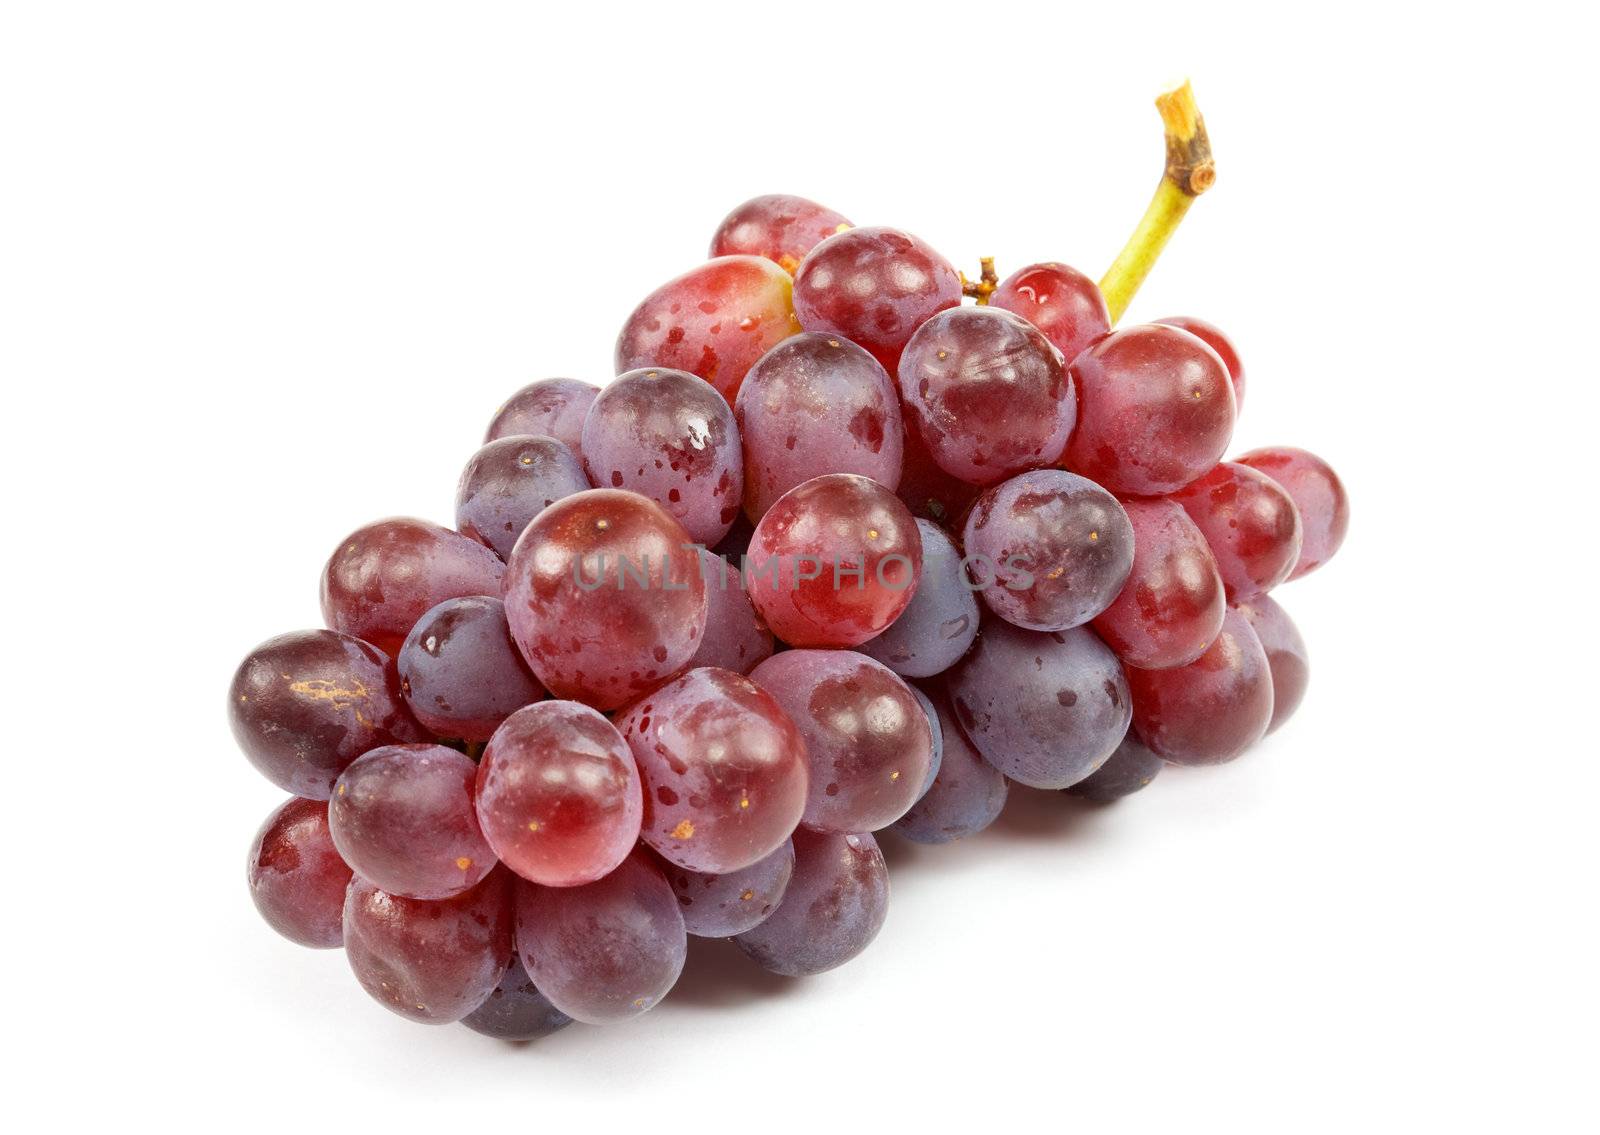 Cluster of ripe grapes on a white background